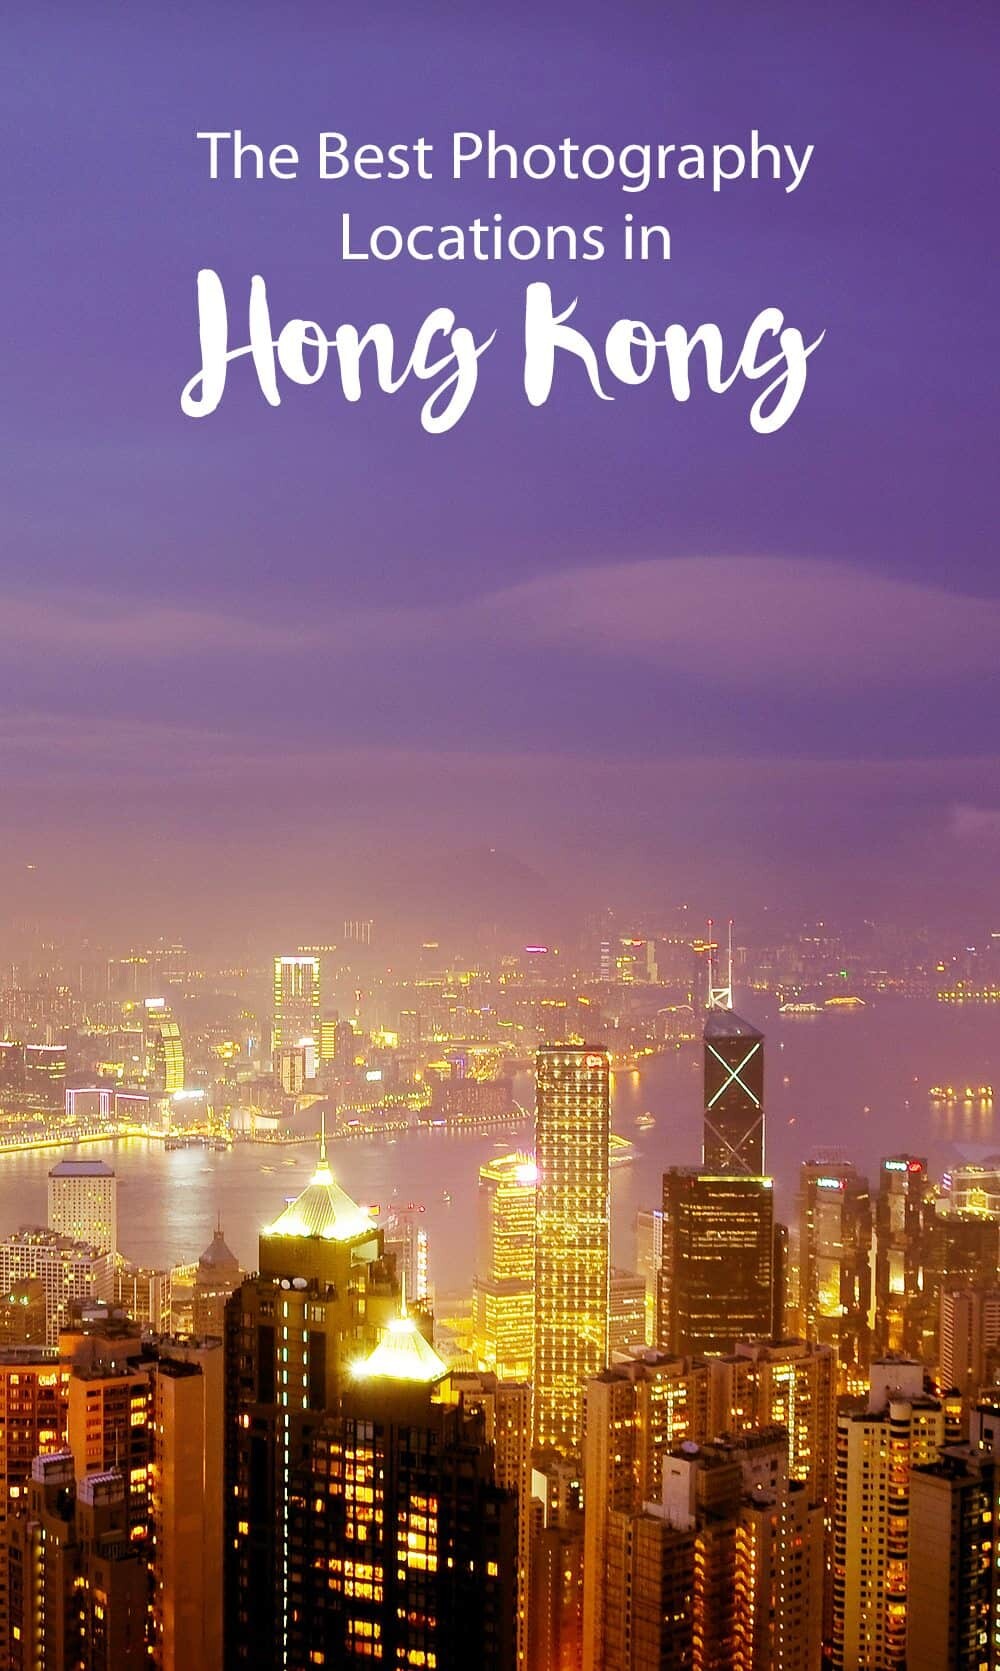 Hong Kong Photo Locations by The Wandering Lens www.thewanderinglens.com